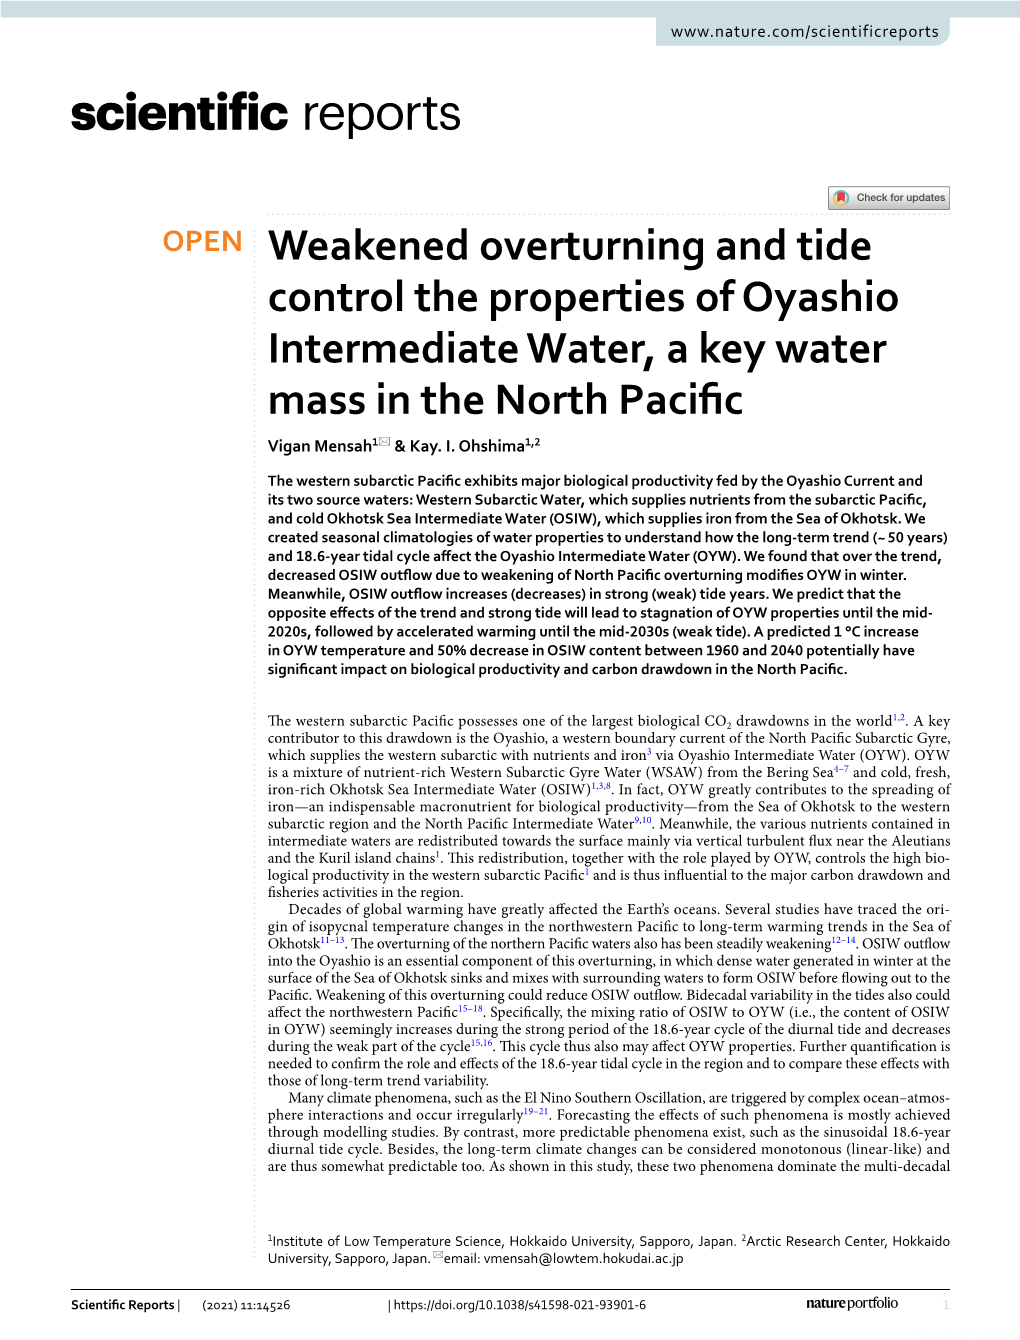 Weakened Overturning and Tide Control the Properties of Oyashio Intermediate Water, a Key Water Mass in the North Pacifc Vigan Mensah1* & Kay